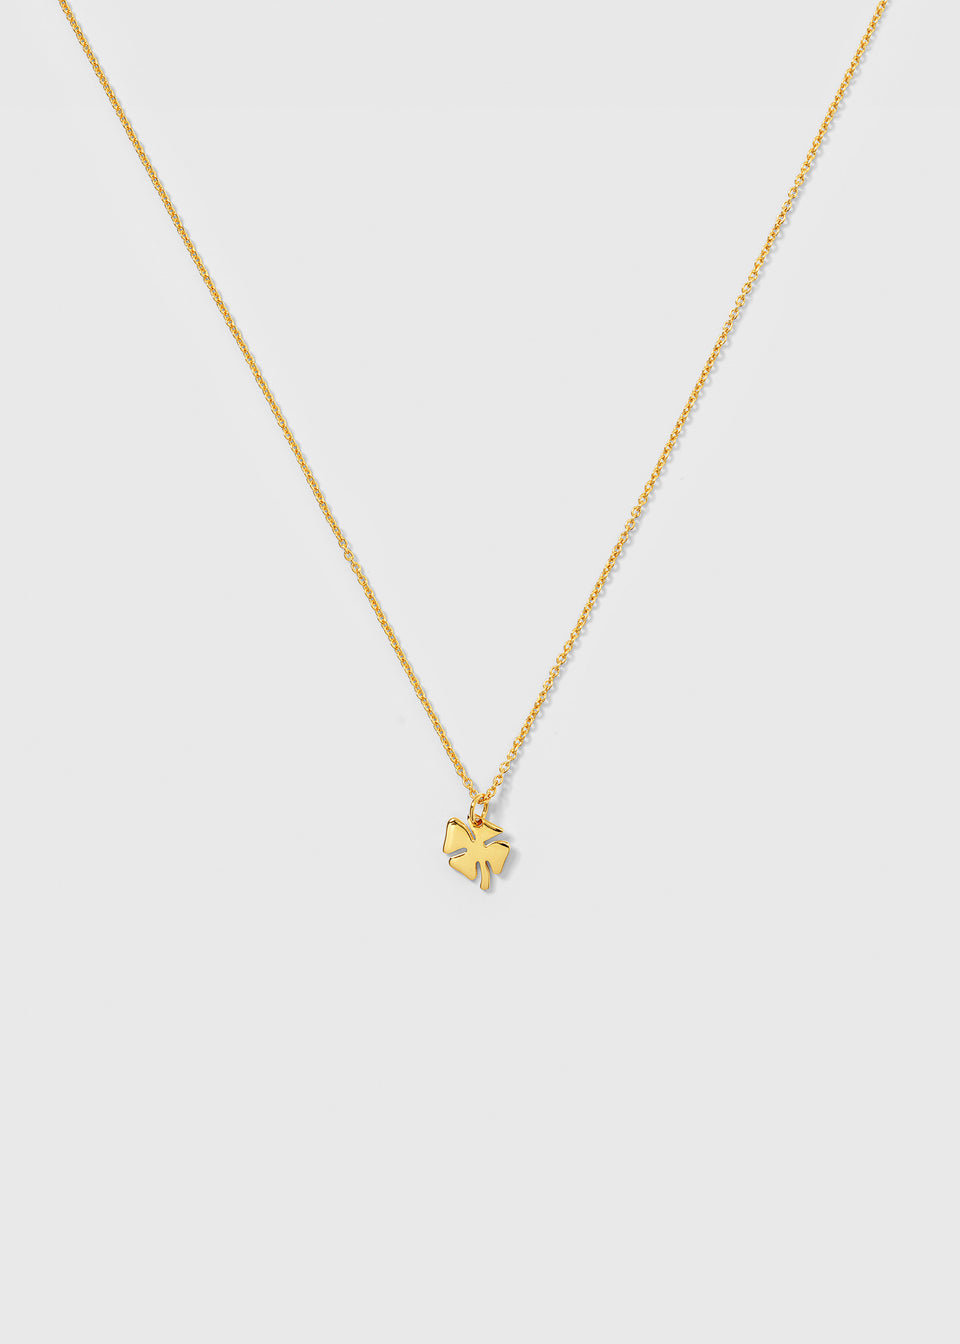 Bring Me Luck Necklace Gold